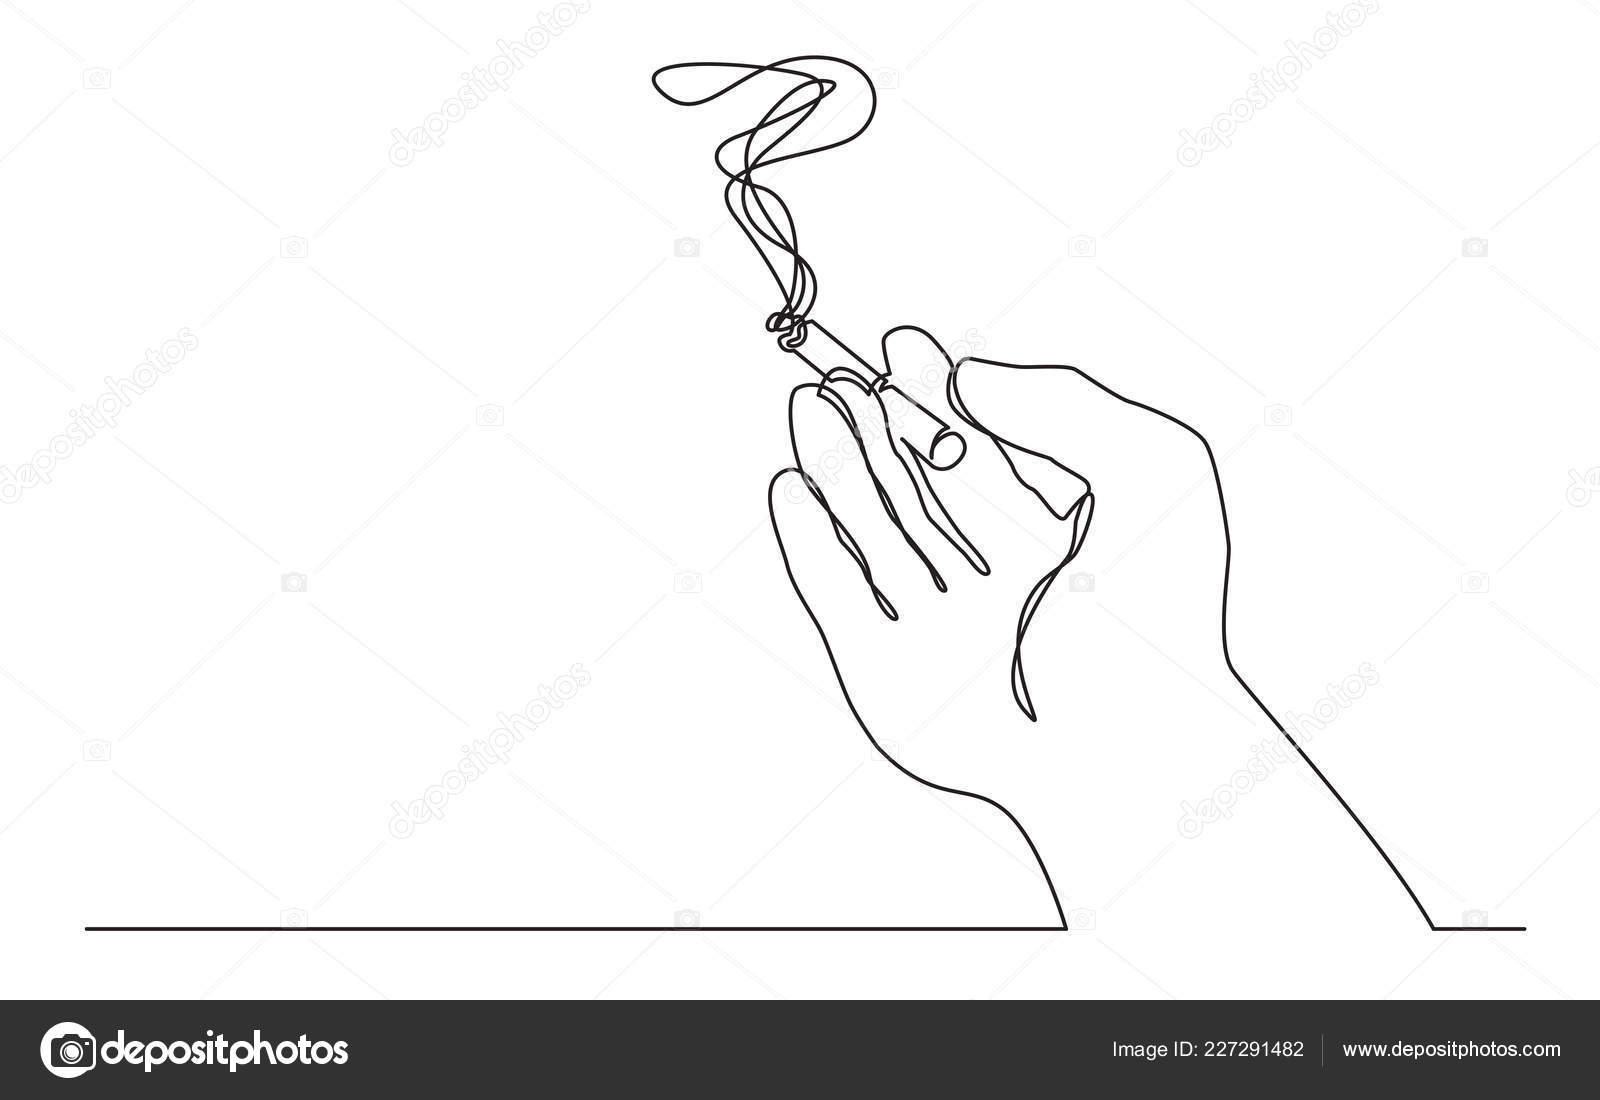 Cigarette Line Drawing Continuous Line Drawing Hand Holding Smoking Cigarette Stock Vector C One Line Man 227291482 Everyone wants to draw better, but some times the complicated nature of anatomy study can be overwhelming. cigarette line drawing continuous line drawing hand holding smoking cigarette stock vector c one line man 227291482